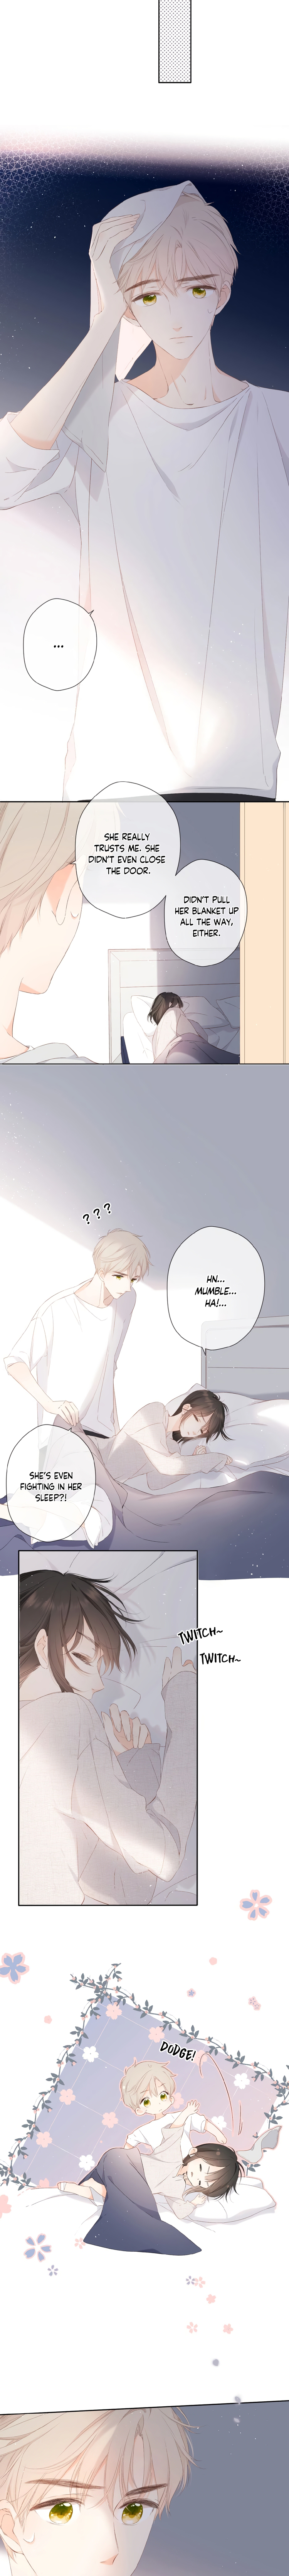 Once More Ch. 14 Sleeping Confession